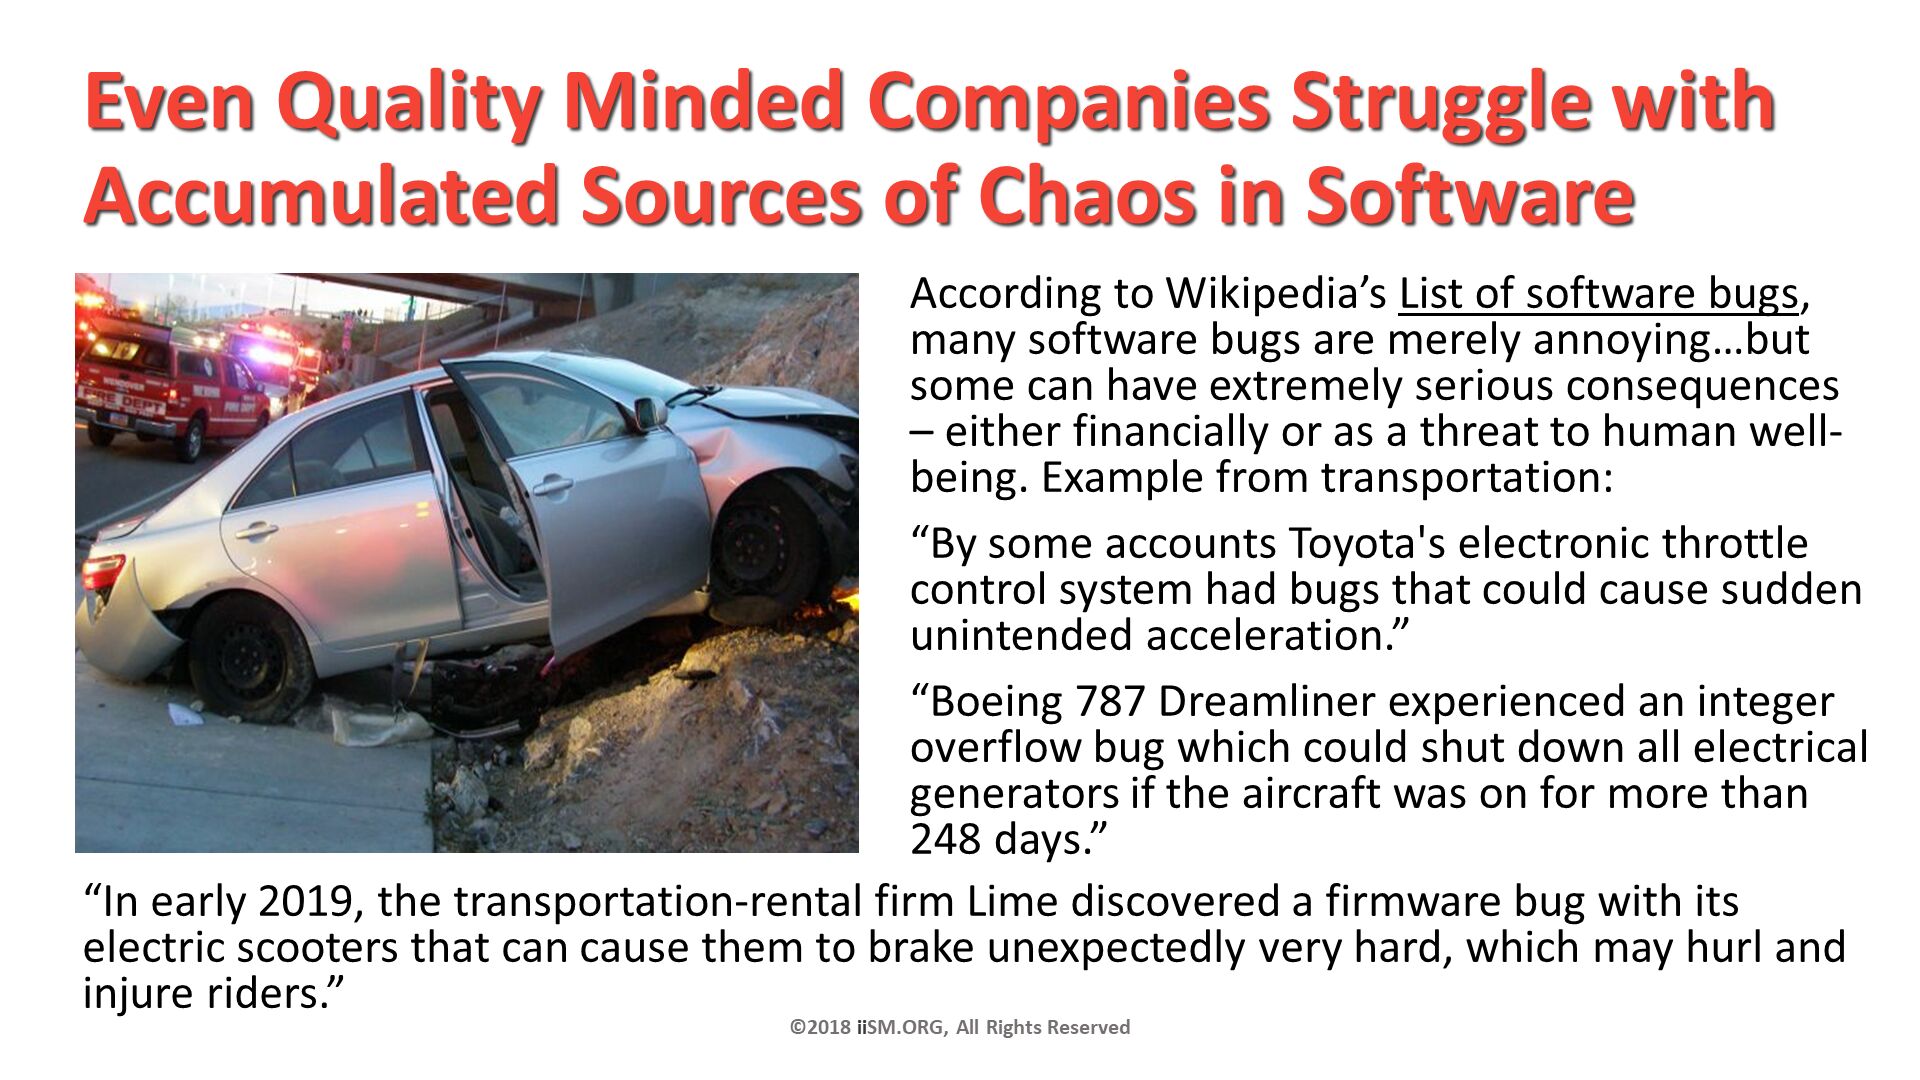 Even Quality Minded Companies Struggle with Accumulated Sources of Chaos in Software. According to Wikipedia’s List of software bugs, many software bugs are merely annoying…but some can have extremely serious consequences – either financially or as a threat to human well-being. Example from transportation: 
“By some accounts Toyota's electronic throttle control system had bugs that could cause sudden unintended acceleration.”
“Boeing 787 Dreamliner experienced an integer overflow bug which could shut down all electrical generators if the aircraft was on for more than 248 days.”
. ©2018 iiSM.ORG, All Rights Reserved. “In early 2019, the transportation-rental firm Lime discovered a firmware bug with its electric scooters that can cause them to brake unexpectedly very hard, which may hurl and injure riders.”
. 